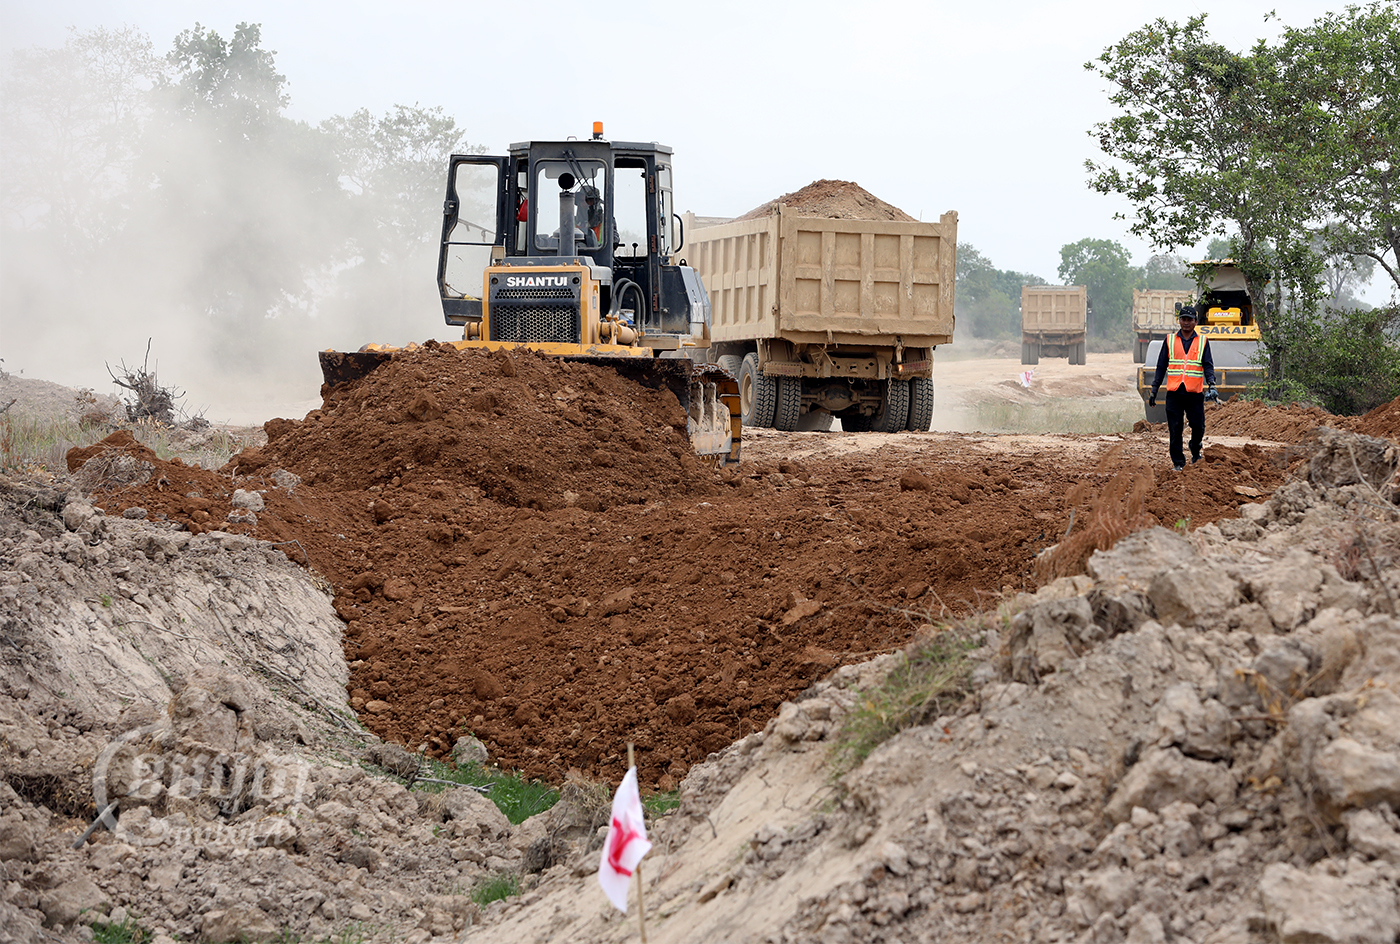 Workers at a relocation site in Kandal province for families who will have to move to make way for the new airport, March 14, 2022. CamboJA/ Pring Samrang